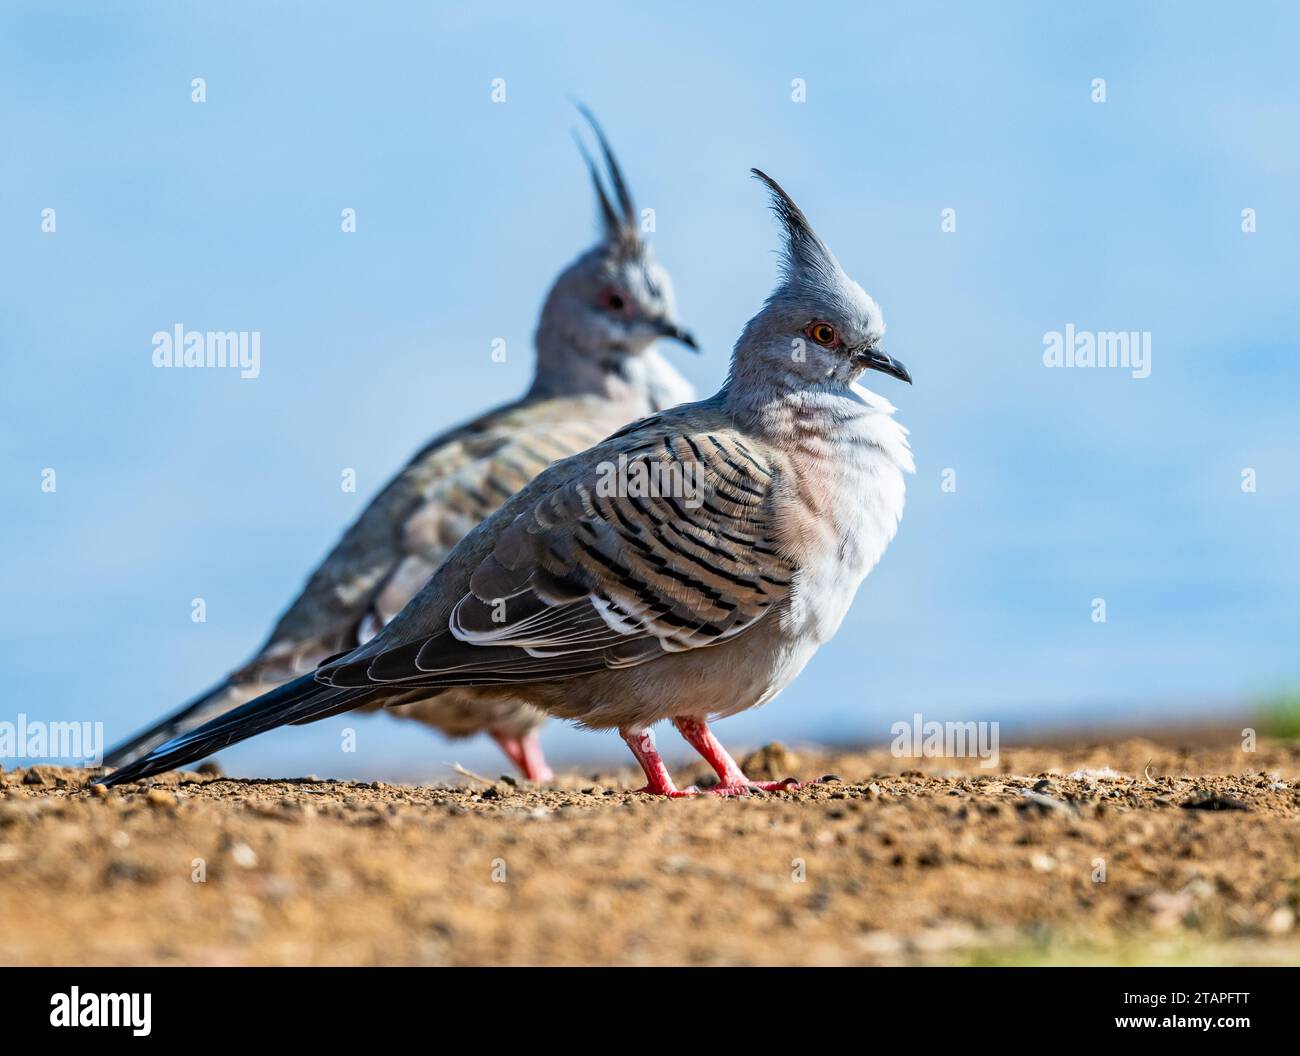 Two Crested Pigeons (Ocyphaps lophotes) in the wild. New South Wales, Australia. Stock Photo